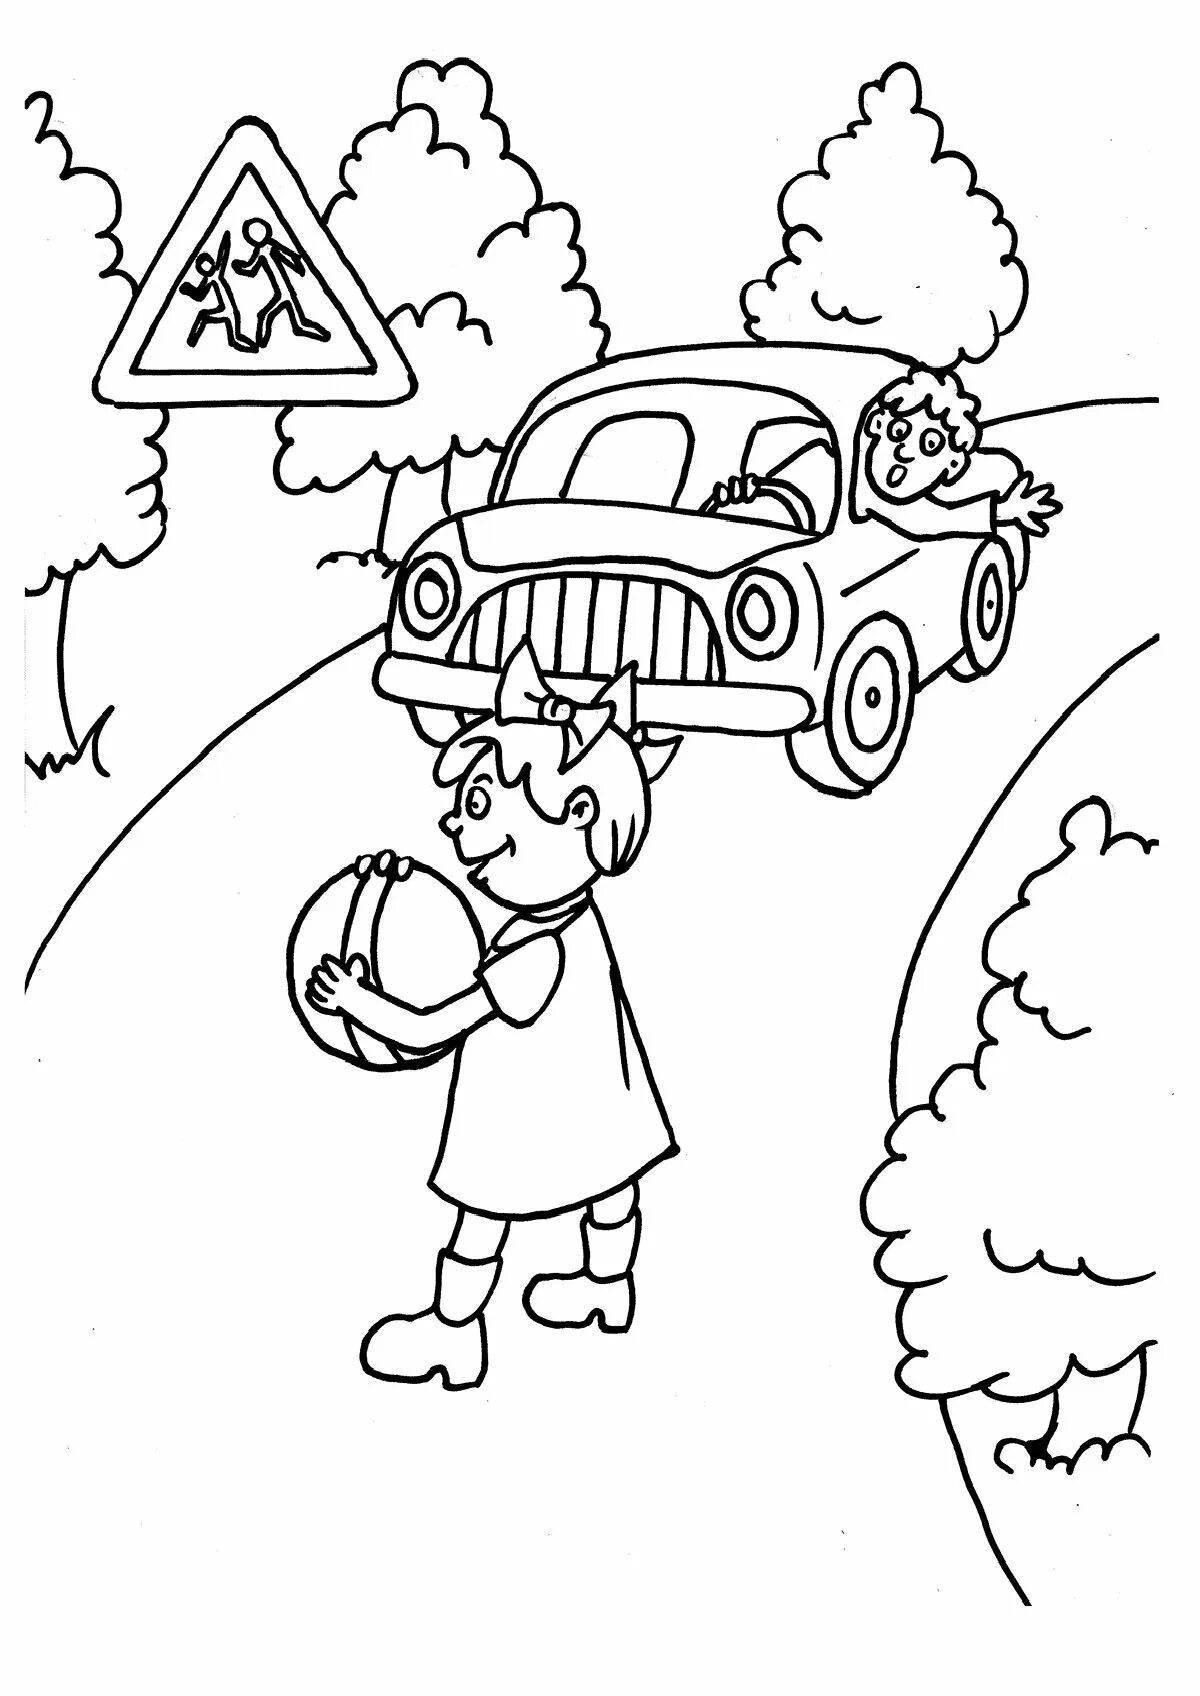 Educational coloring book traffic rules for schoolchildren